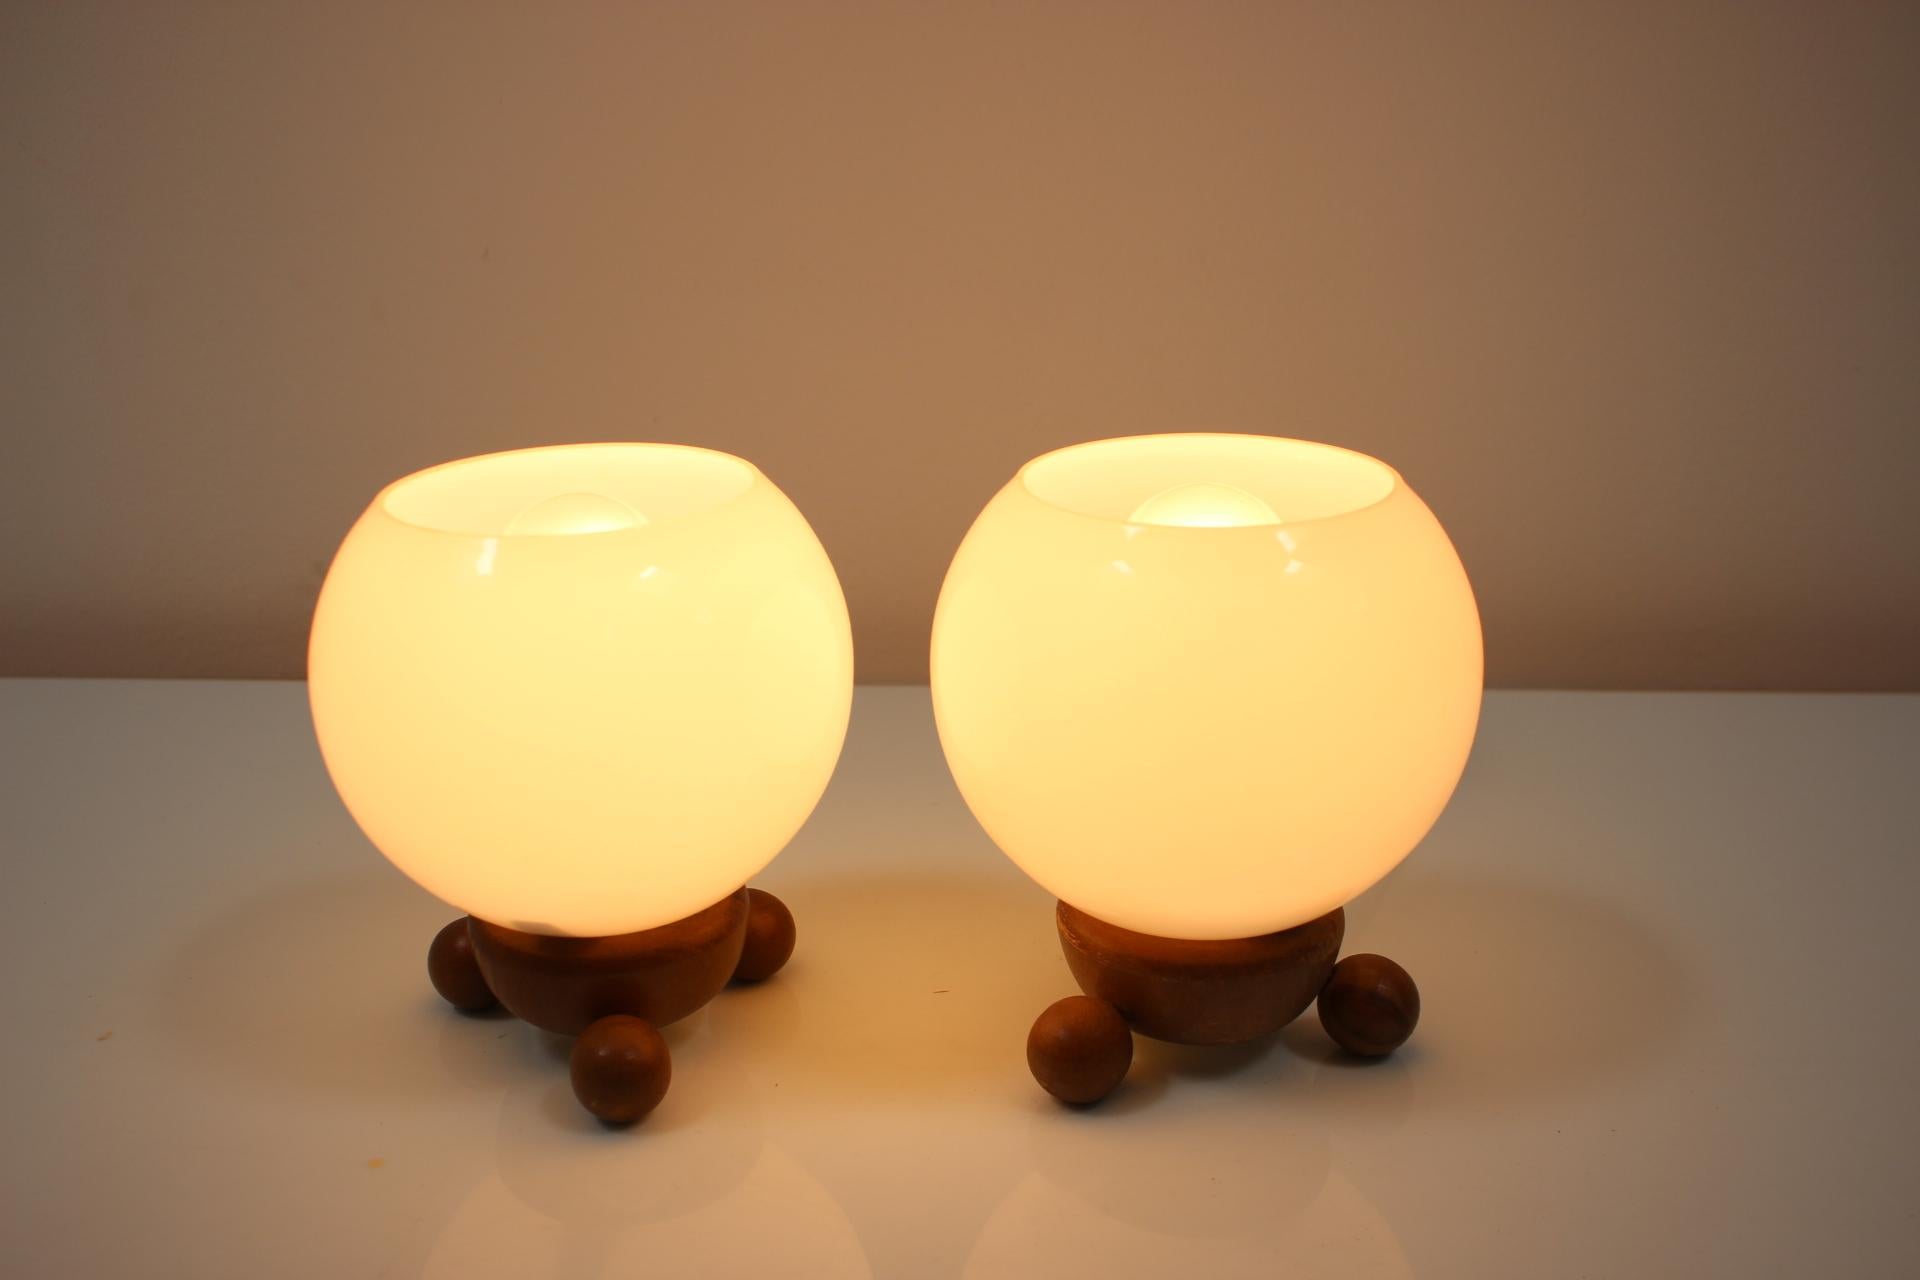 Glass Set of Two Table Lamps/ Inlux Type 81, 1970's